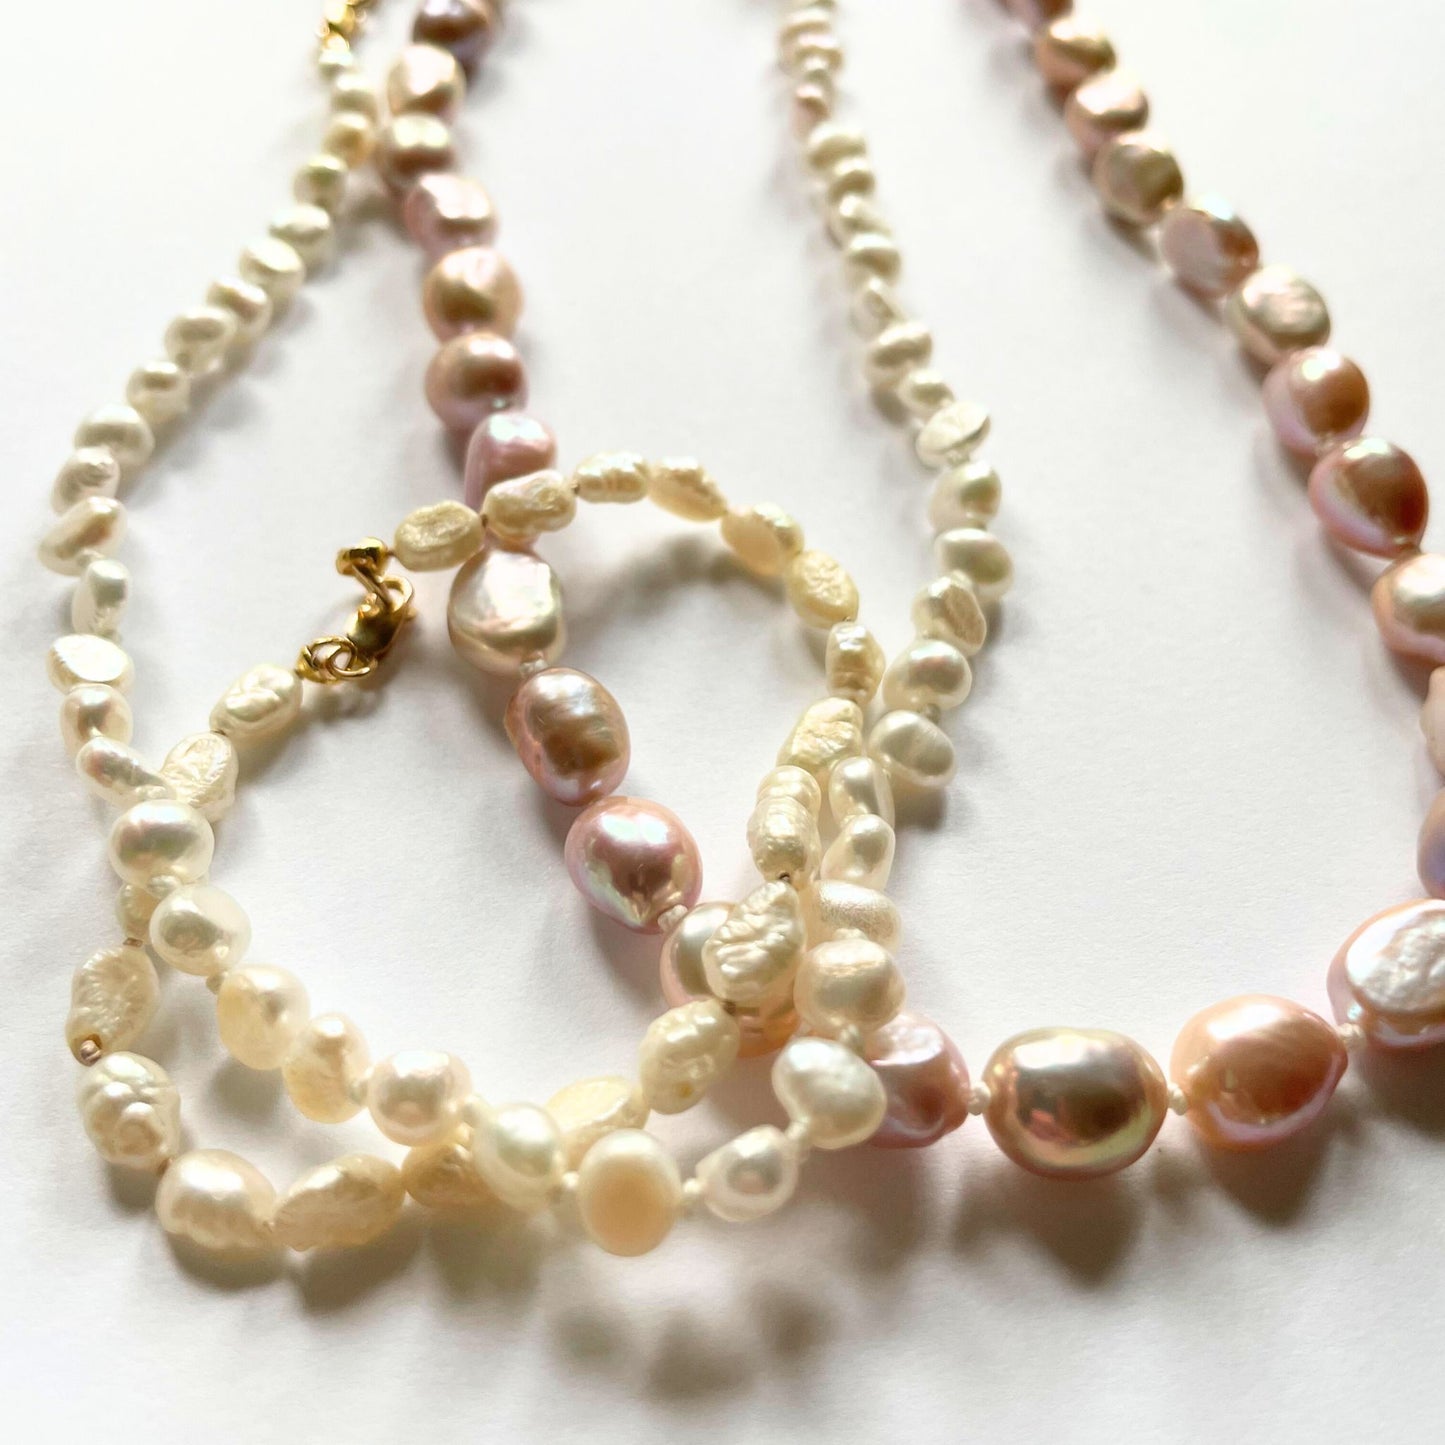 Examples of knotted pearl strands